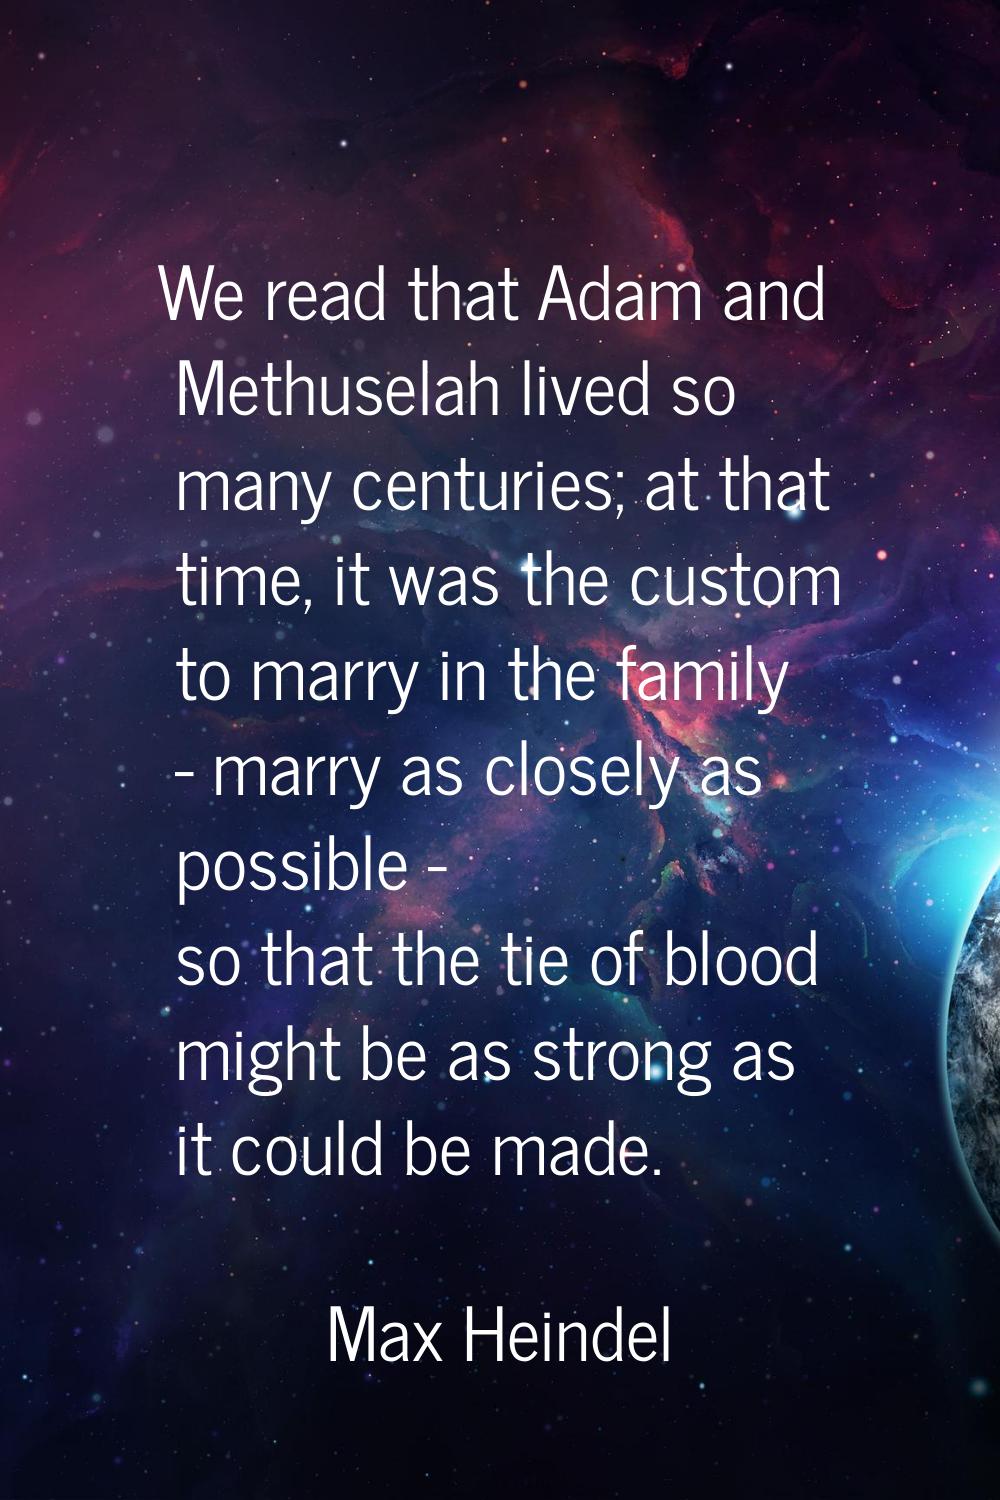 We read that Adam and Methuselah lived so many centuries; at that time, it was the custom to marry 